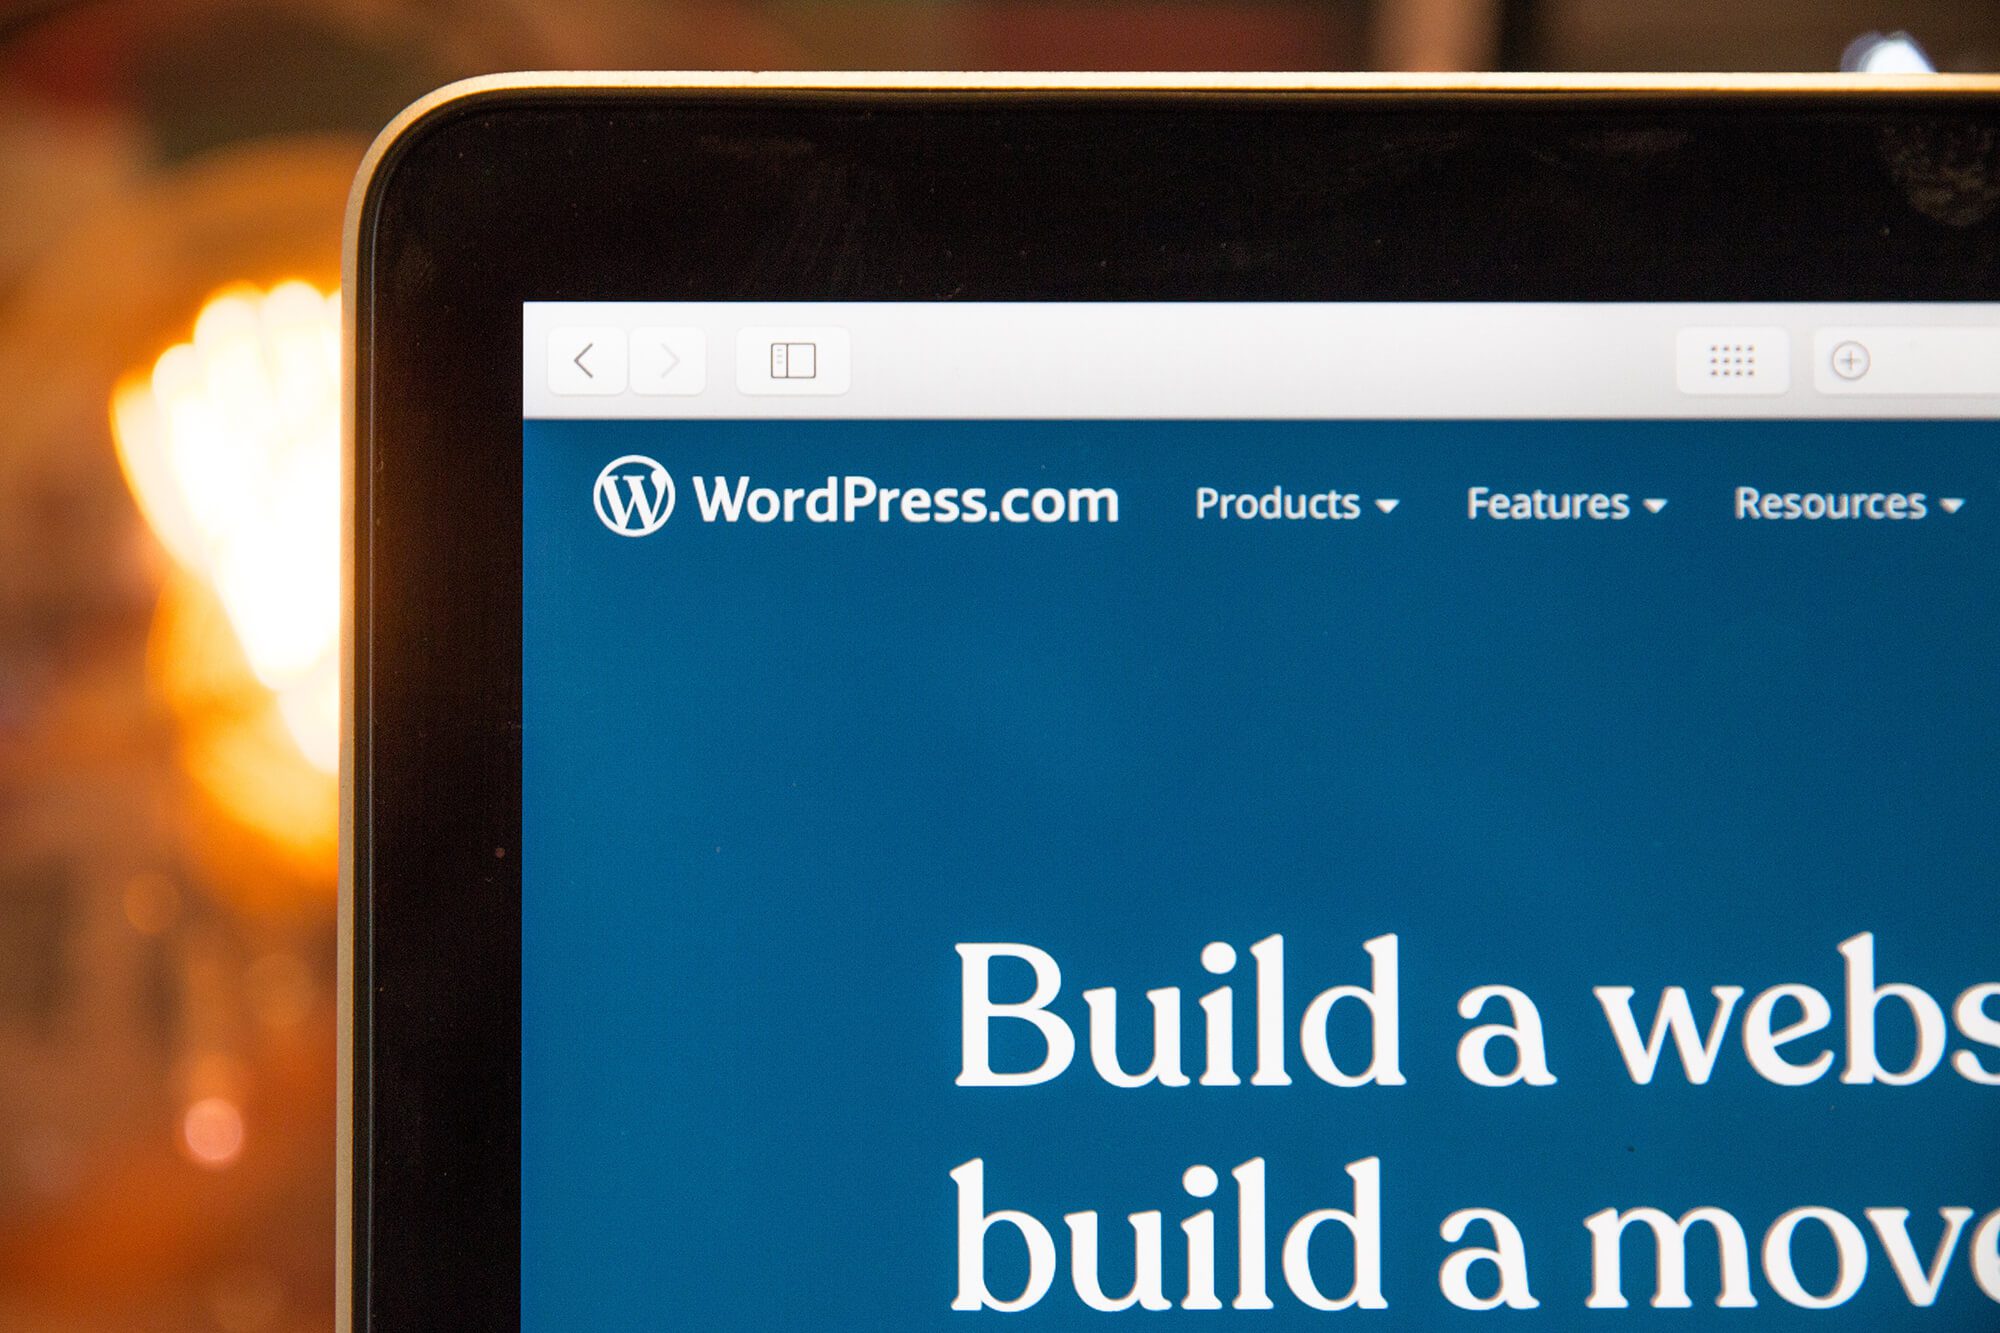 A How-To Guide to Wordpress Hosting from GruffyGoat: Part 3